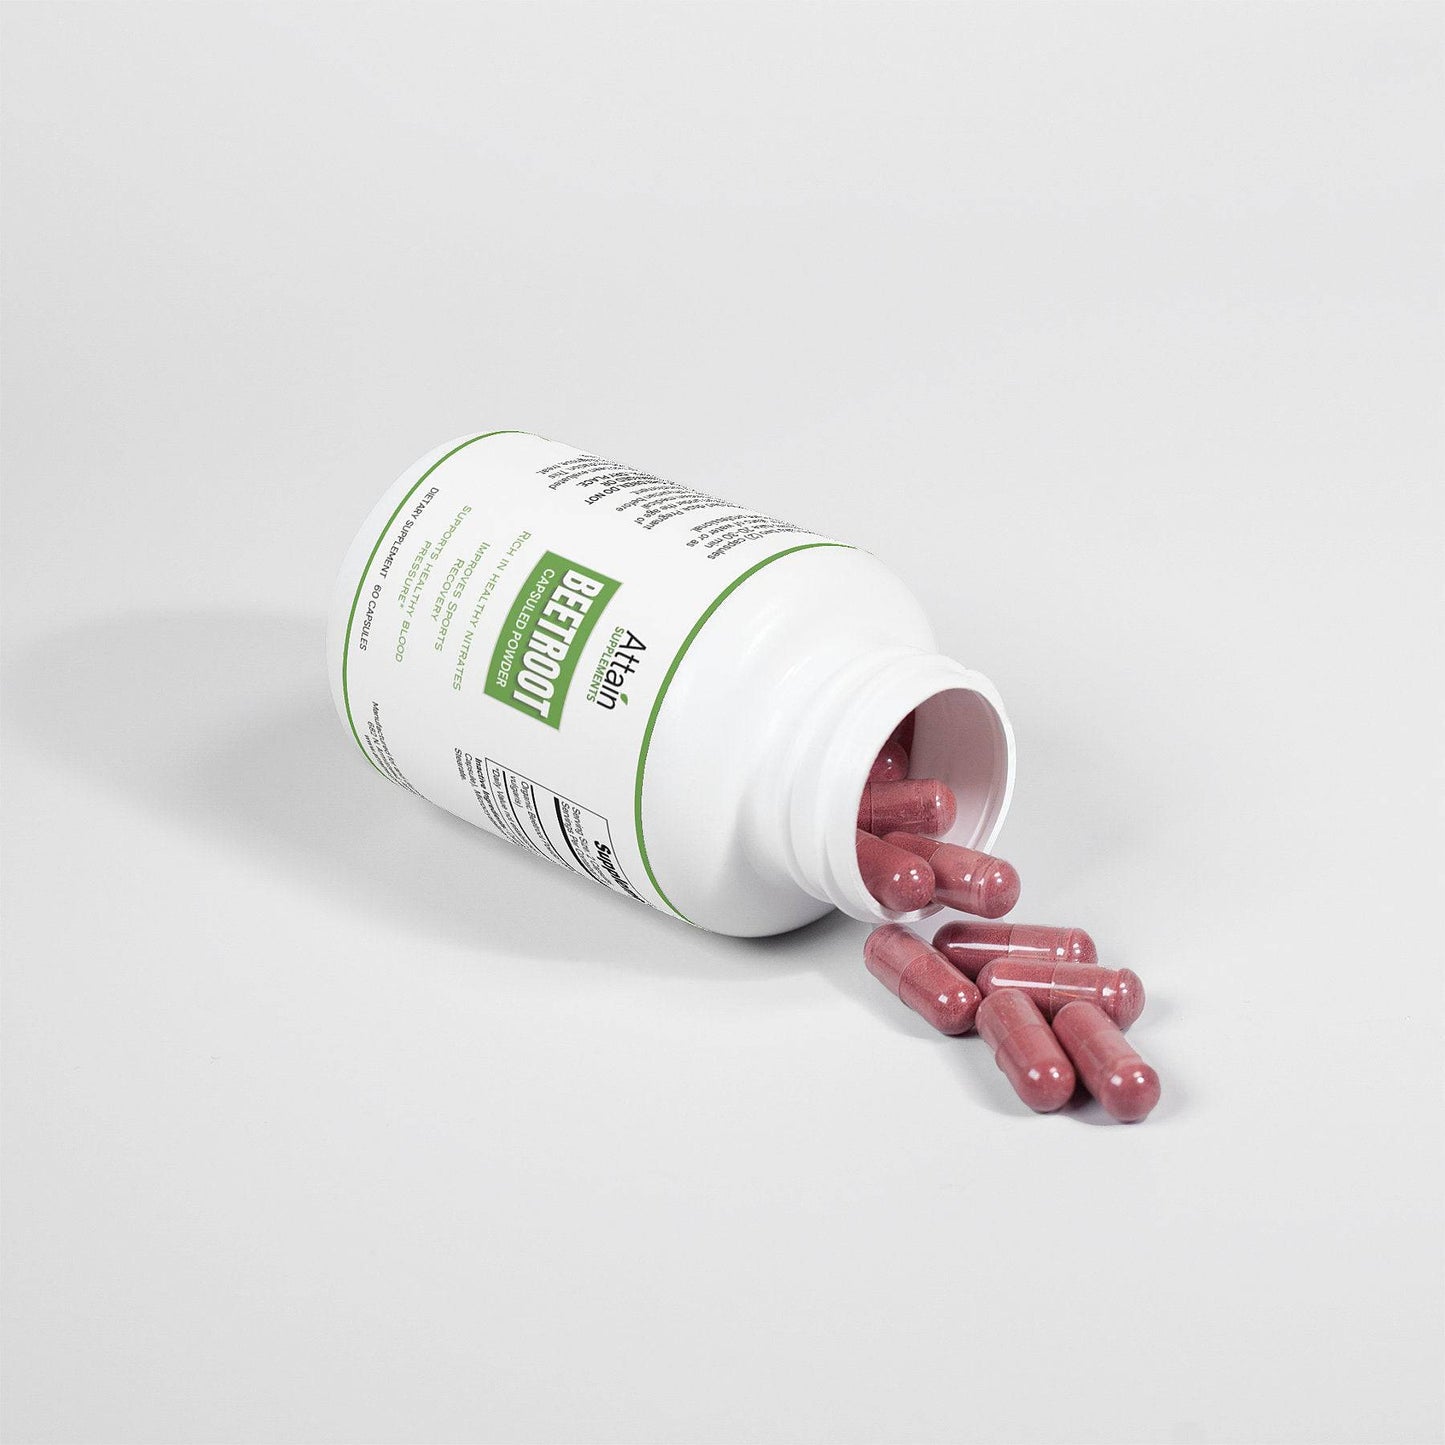 Beetroot Capsulated Powder in Bottle - laying down